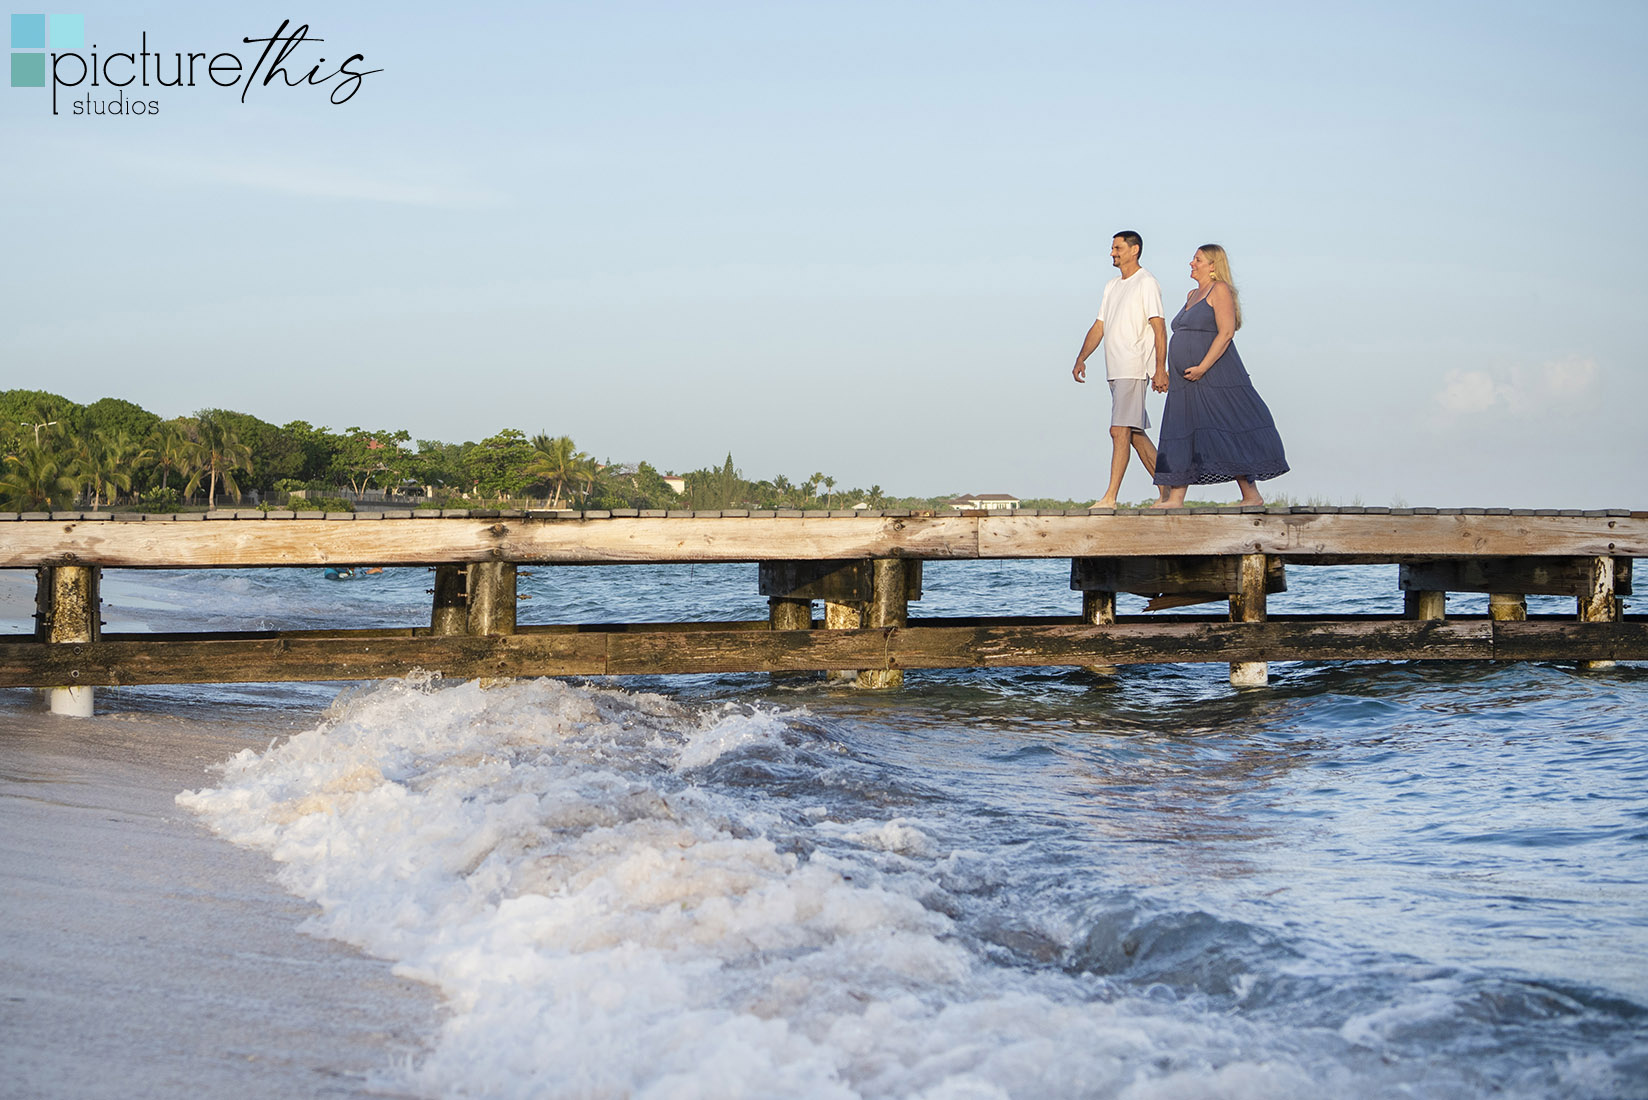 This beautiful couple did their pregnancy portraits in the paradise of Grand Cayman, Cayman Islands with Heather Holt Photography with Picture This Studios.